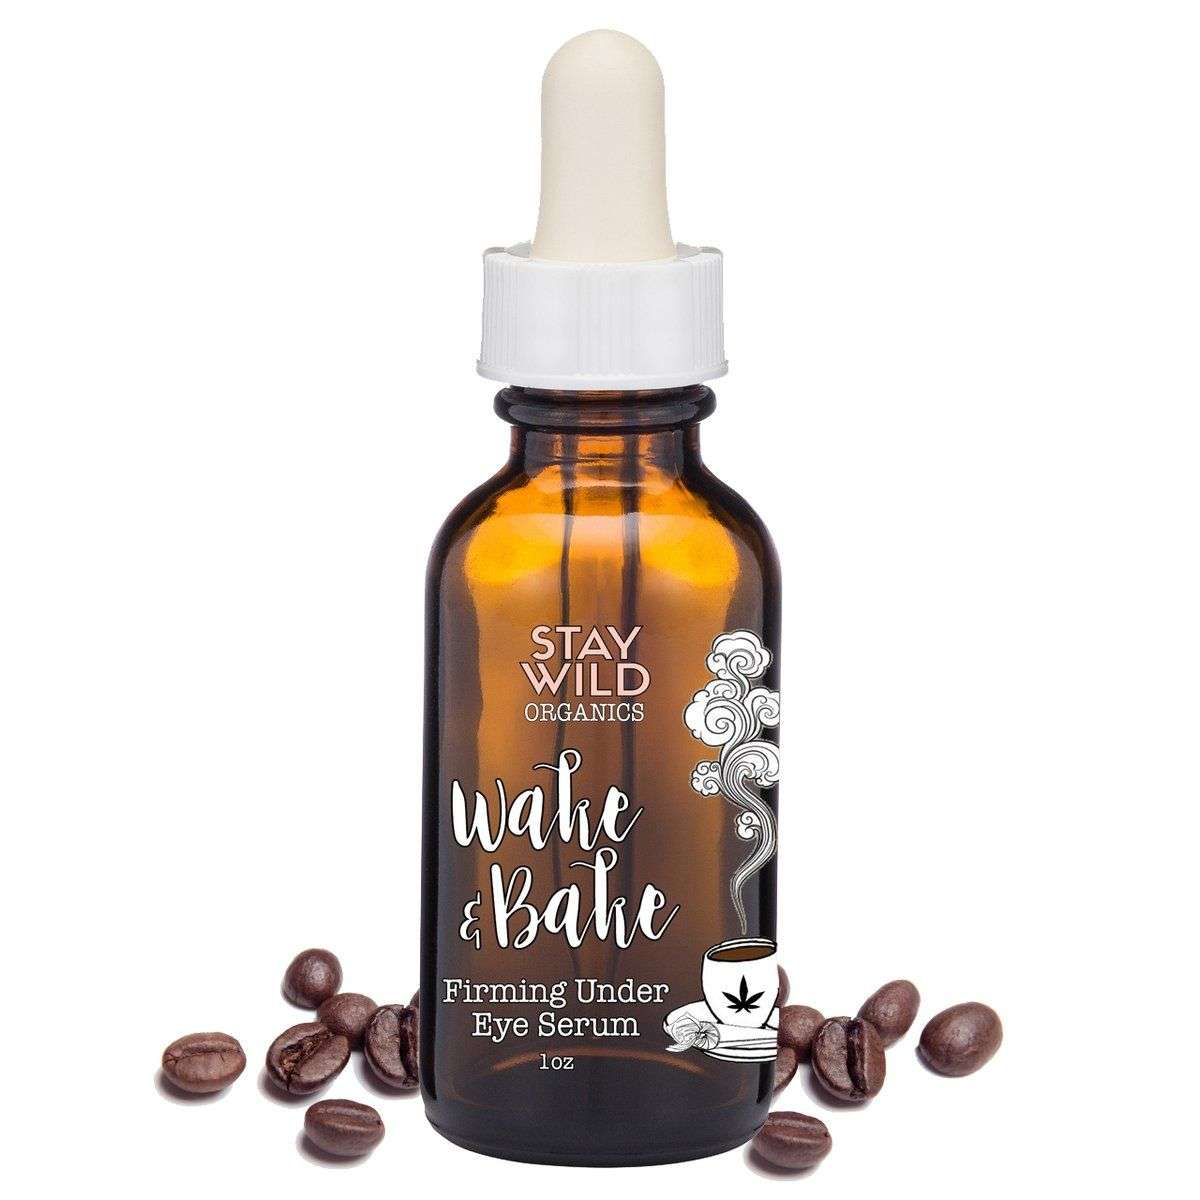 Our new caffeine and hemp oil infused under eye serum is ...